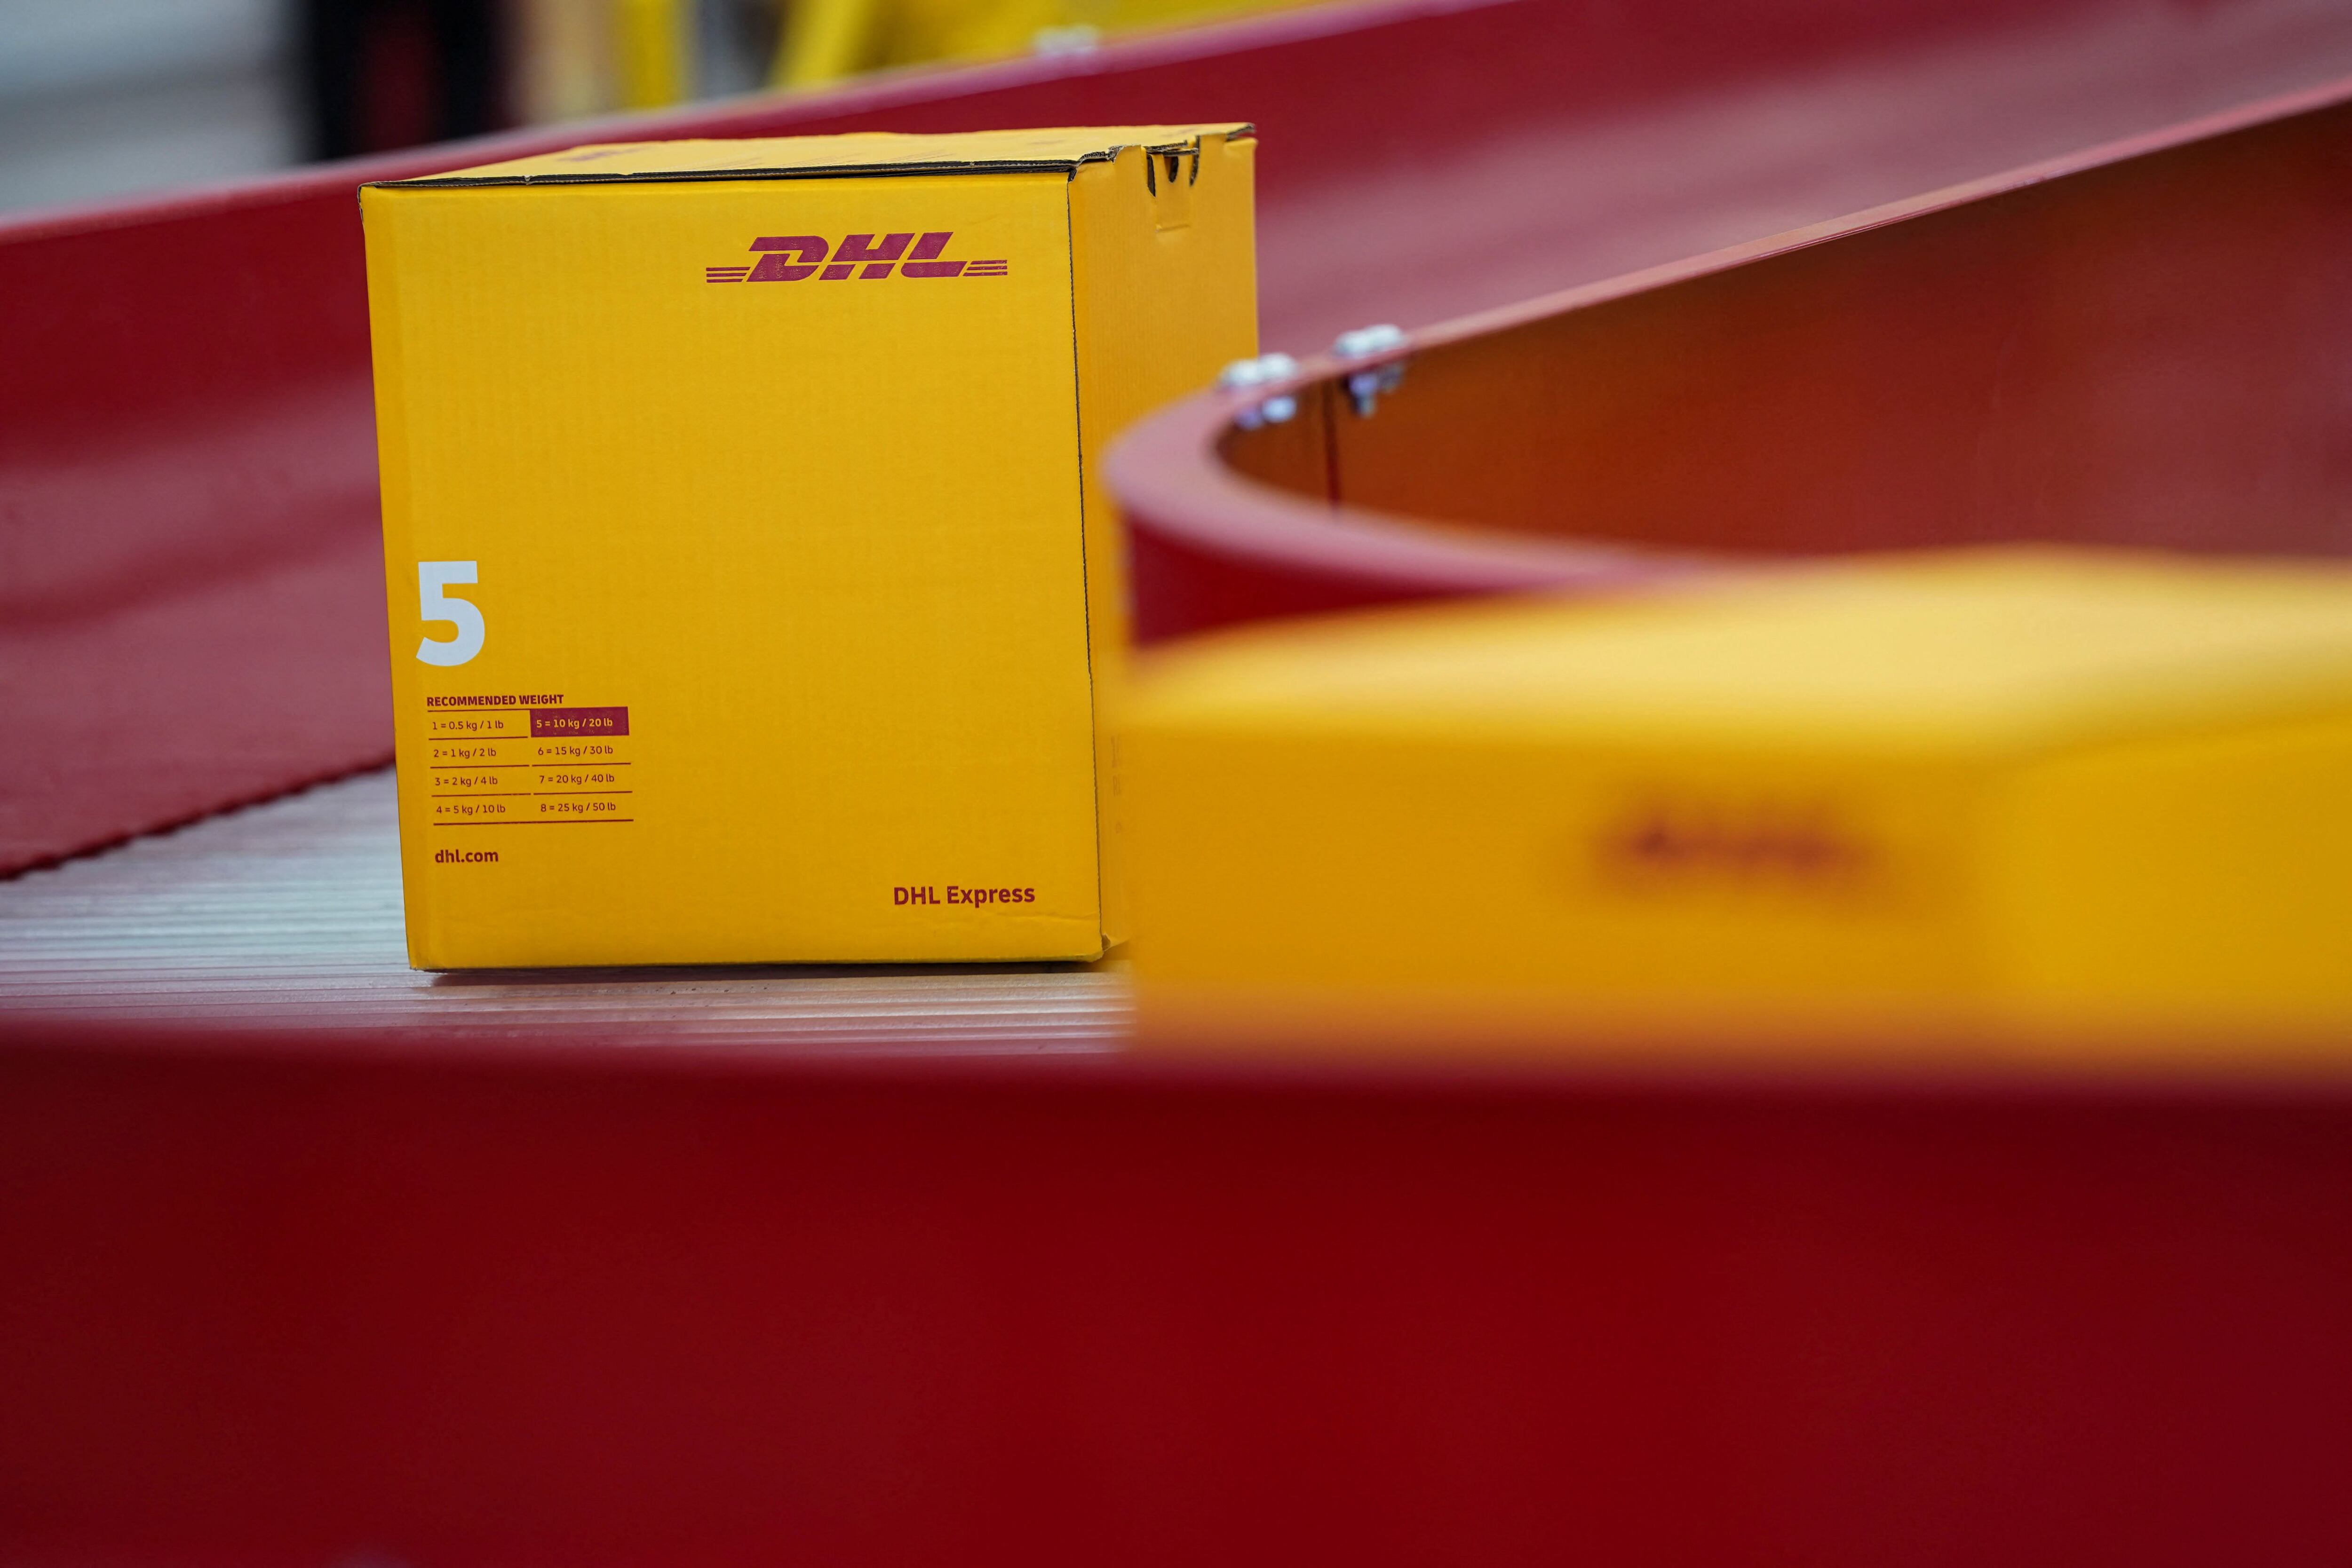 Boxes of German postal and logistics group Deutsche Post (DHL) are displayed during a demonstration marking the inauguration of the company’s new cargo facilities at the Felipe Angeles international airport in Zumpango, Mexico, February 28, 2023. REUTERS/Toya Sarno Jordan